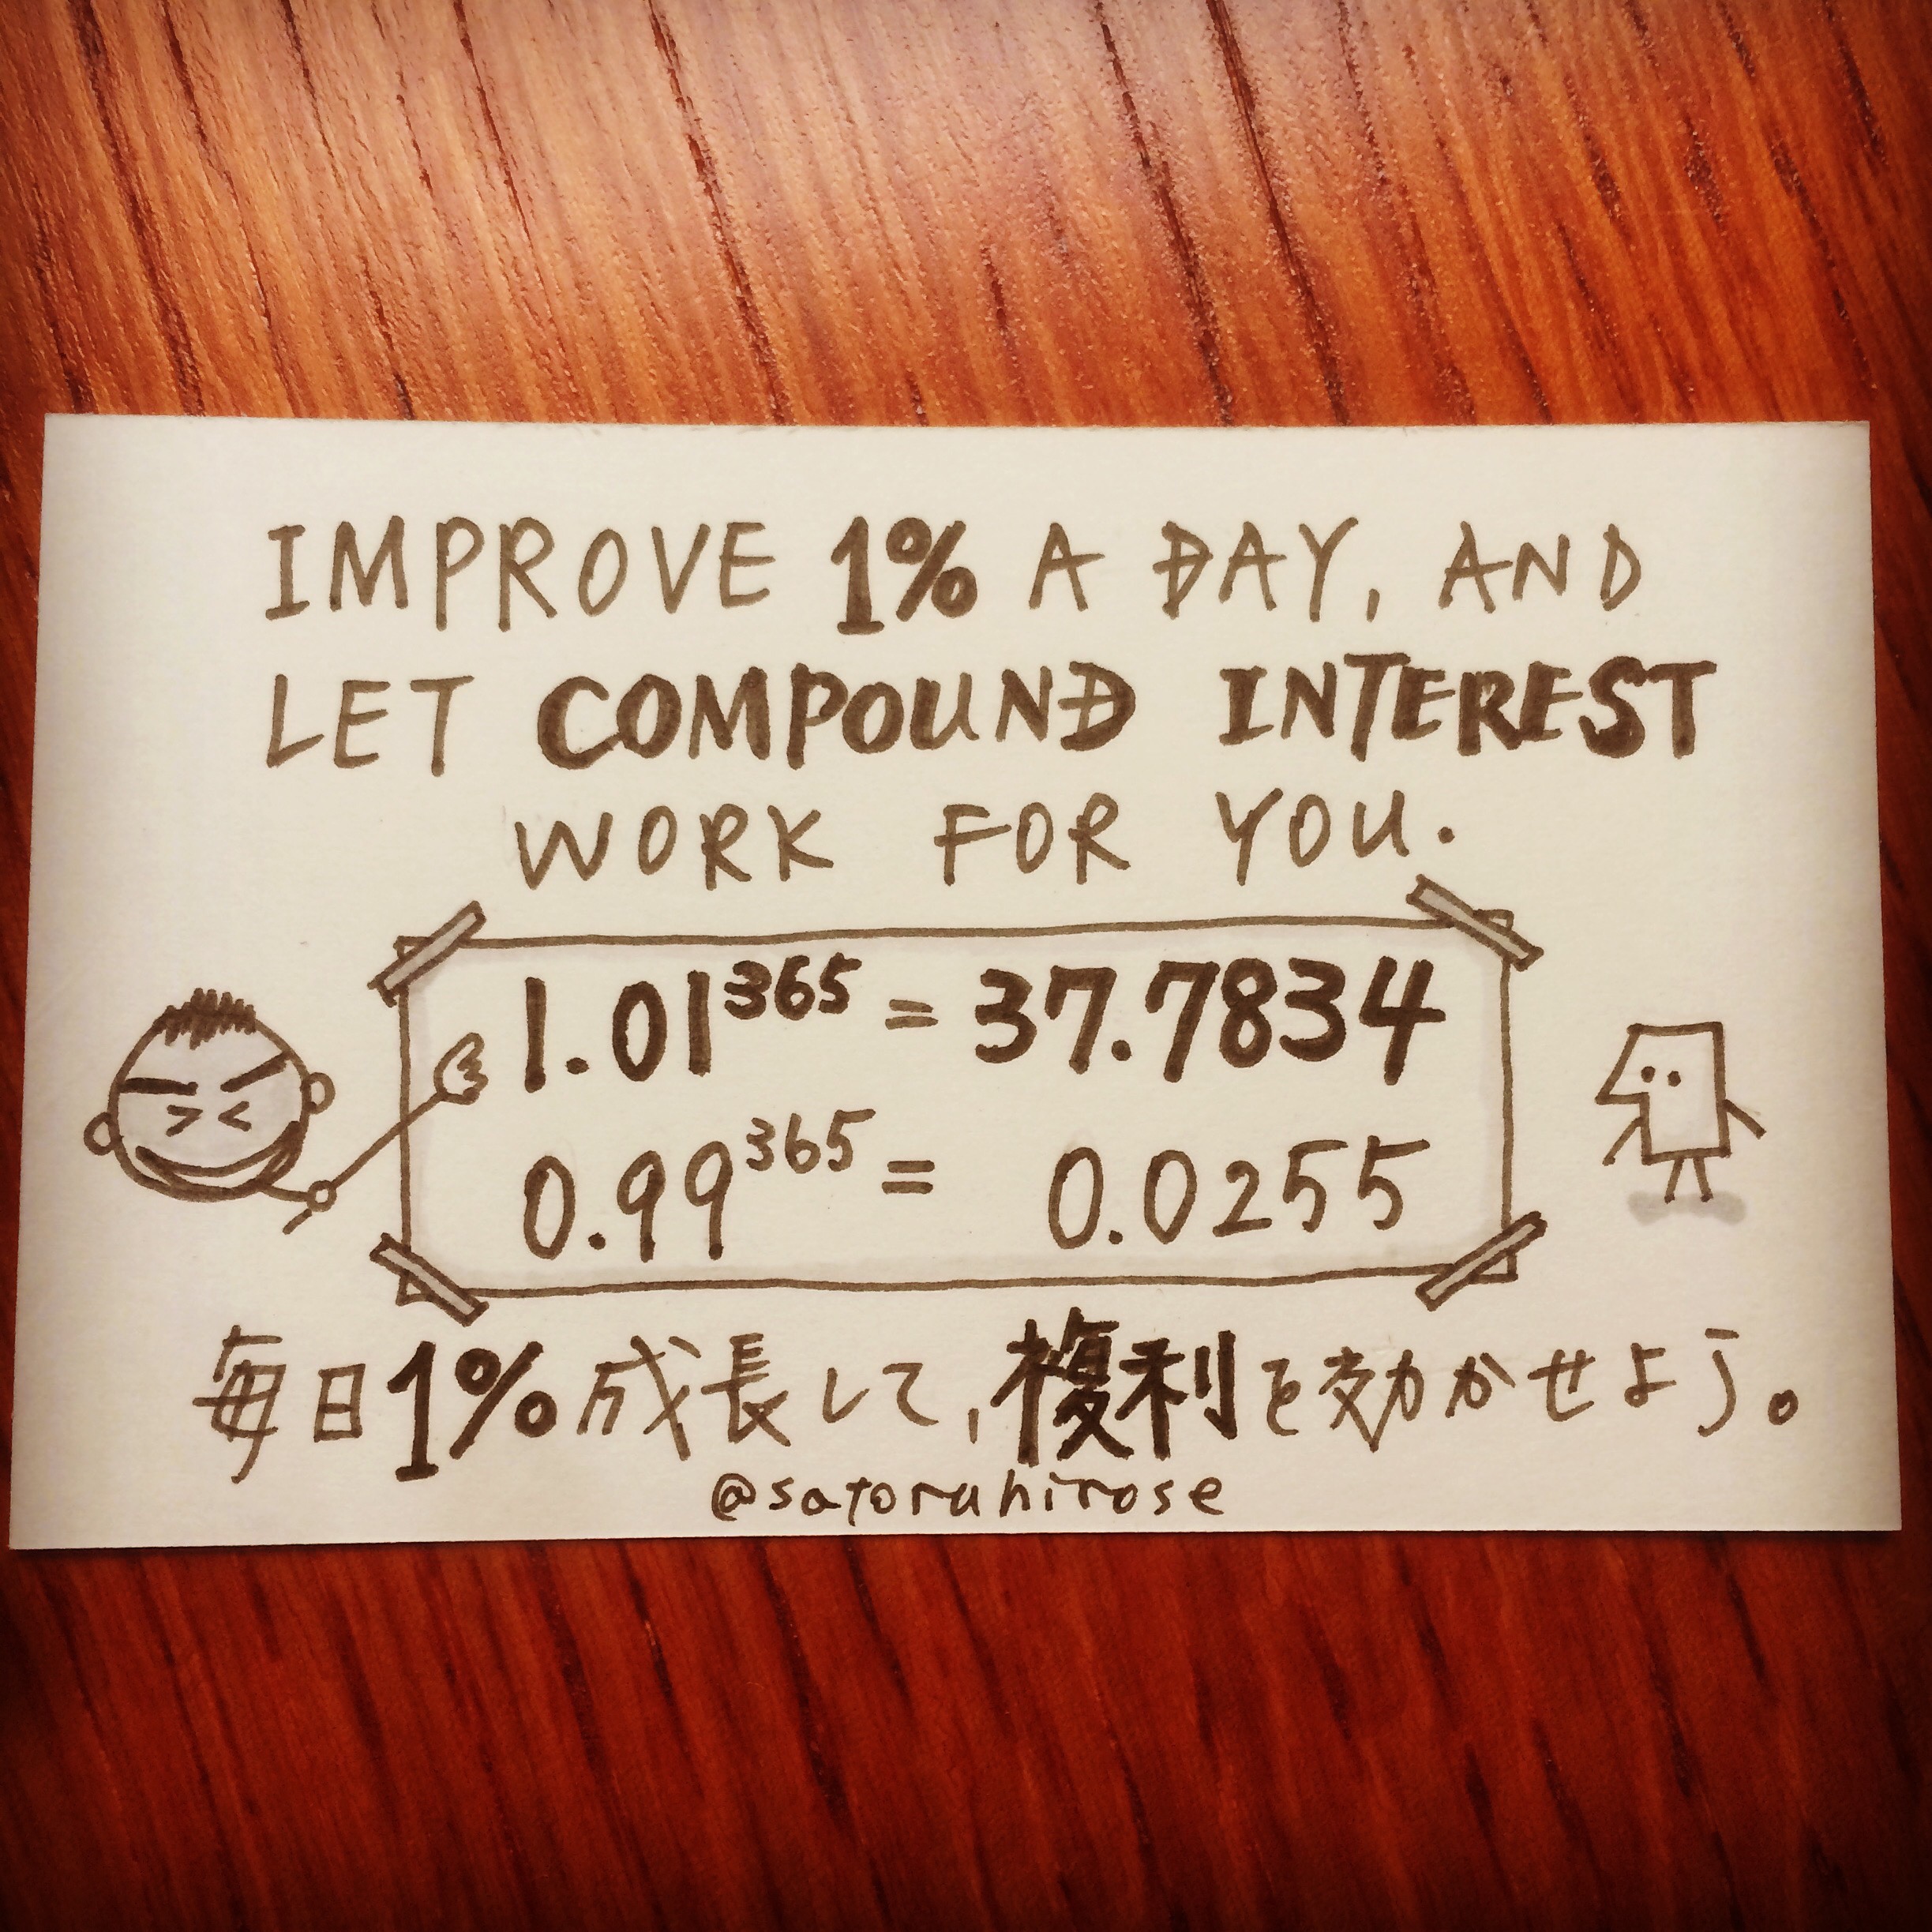 Improve 1% a day, and let compound interest work for you.